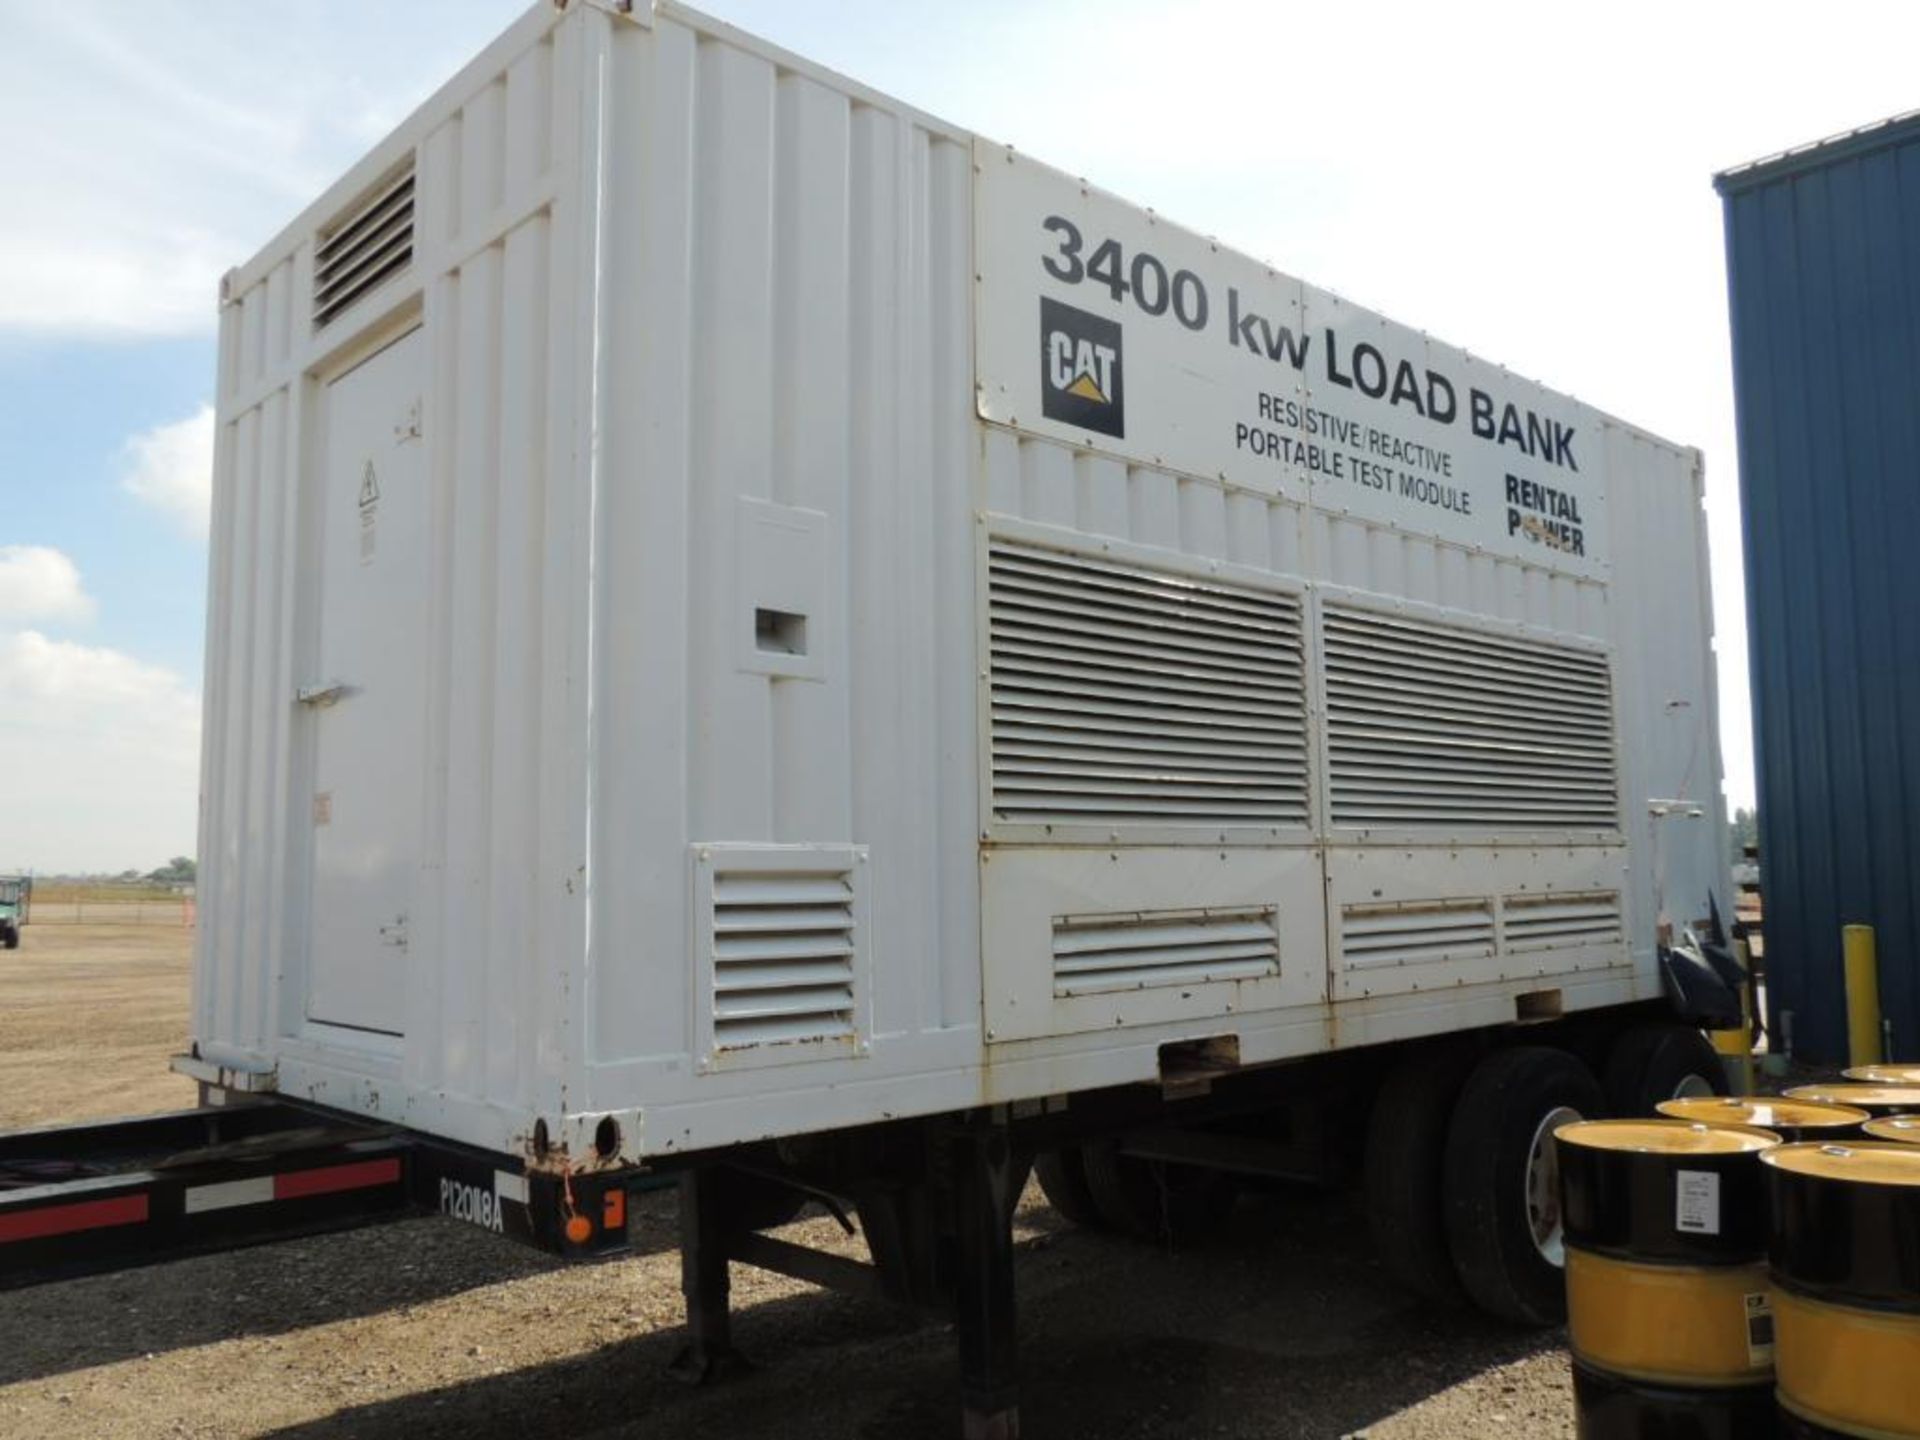 Caterpillar 3400kw Load Bank Resistive Reactive Portable Test Module, Mounted on Tandem-Axle Trailer - Image 3 of 13